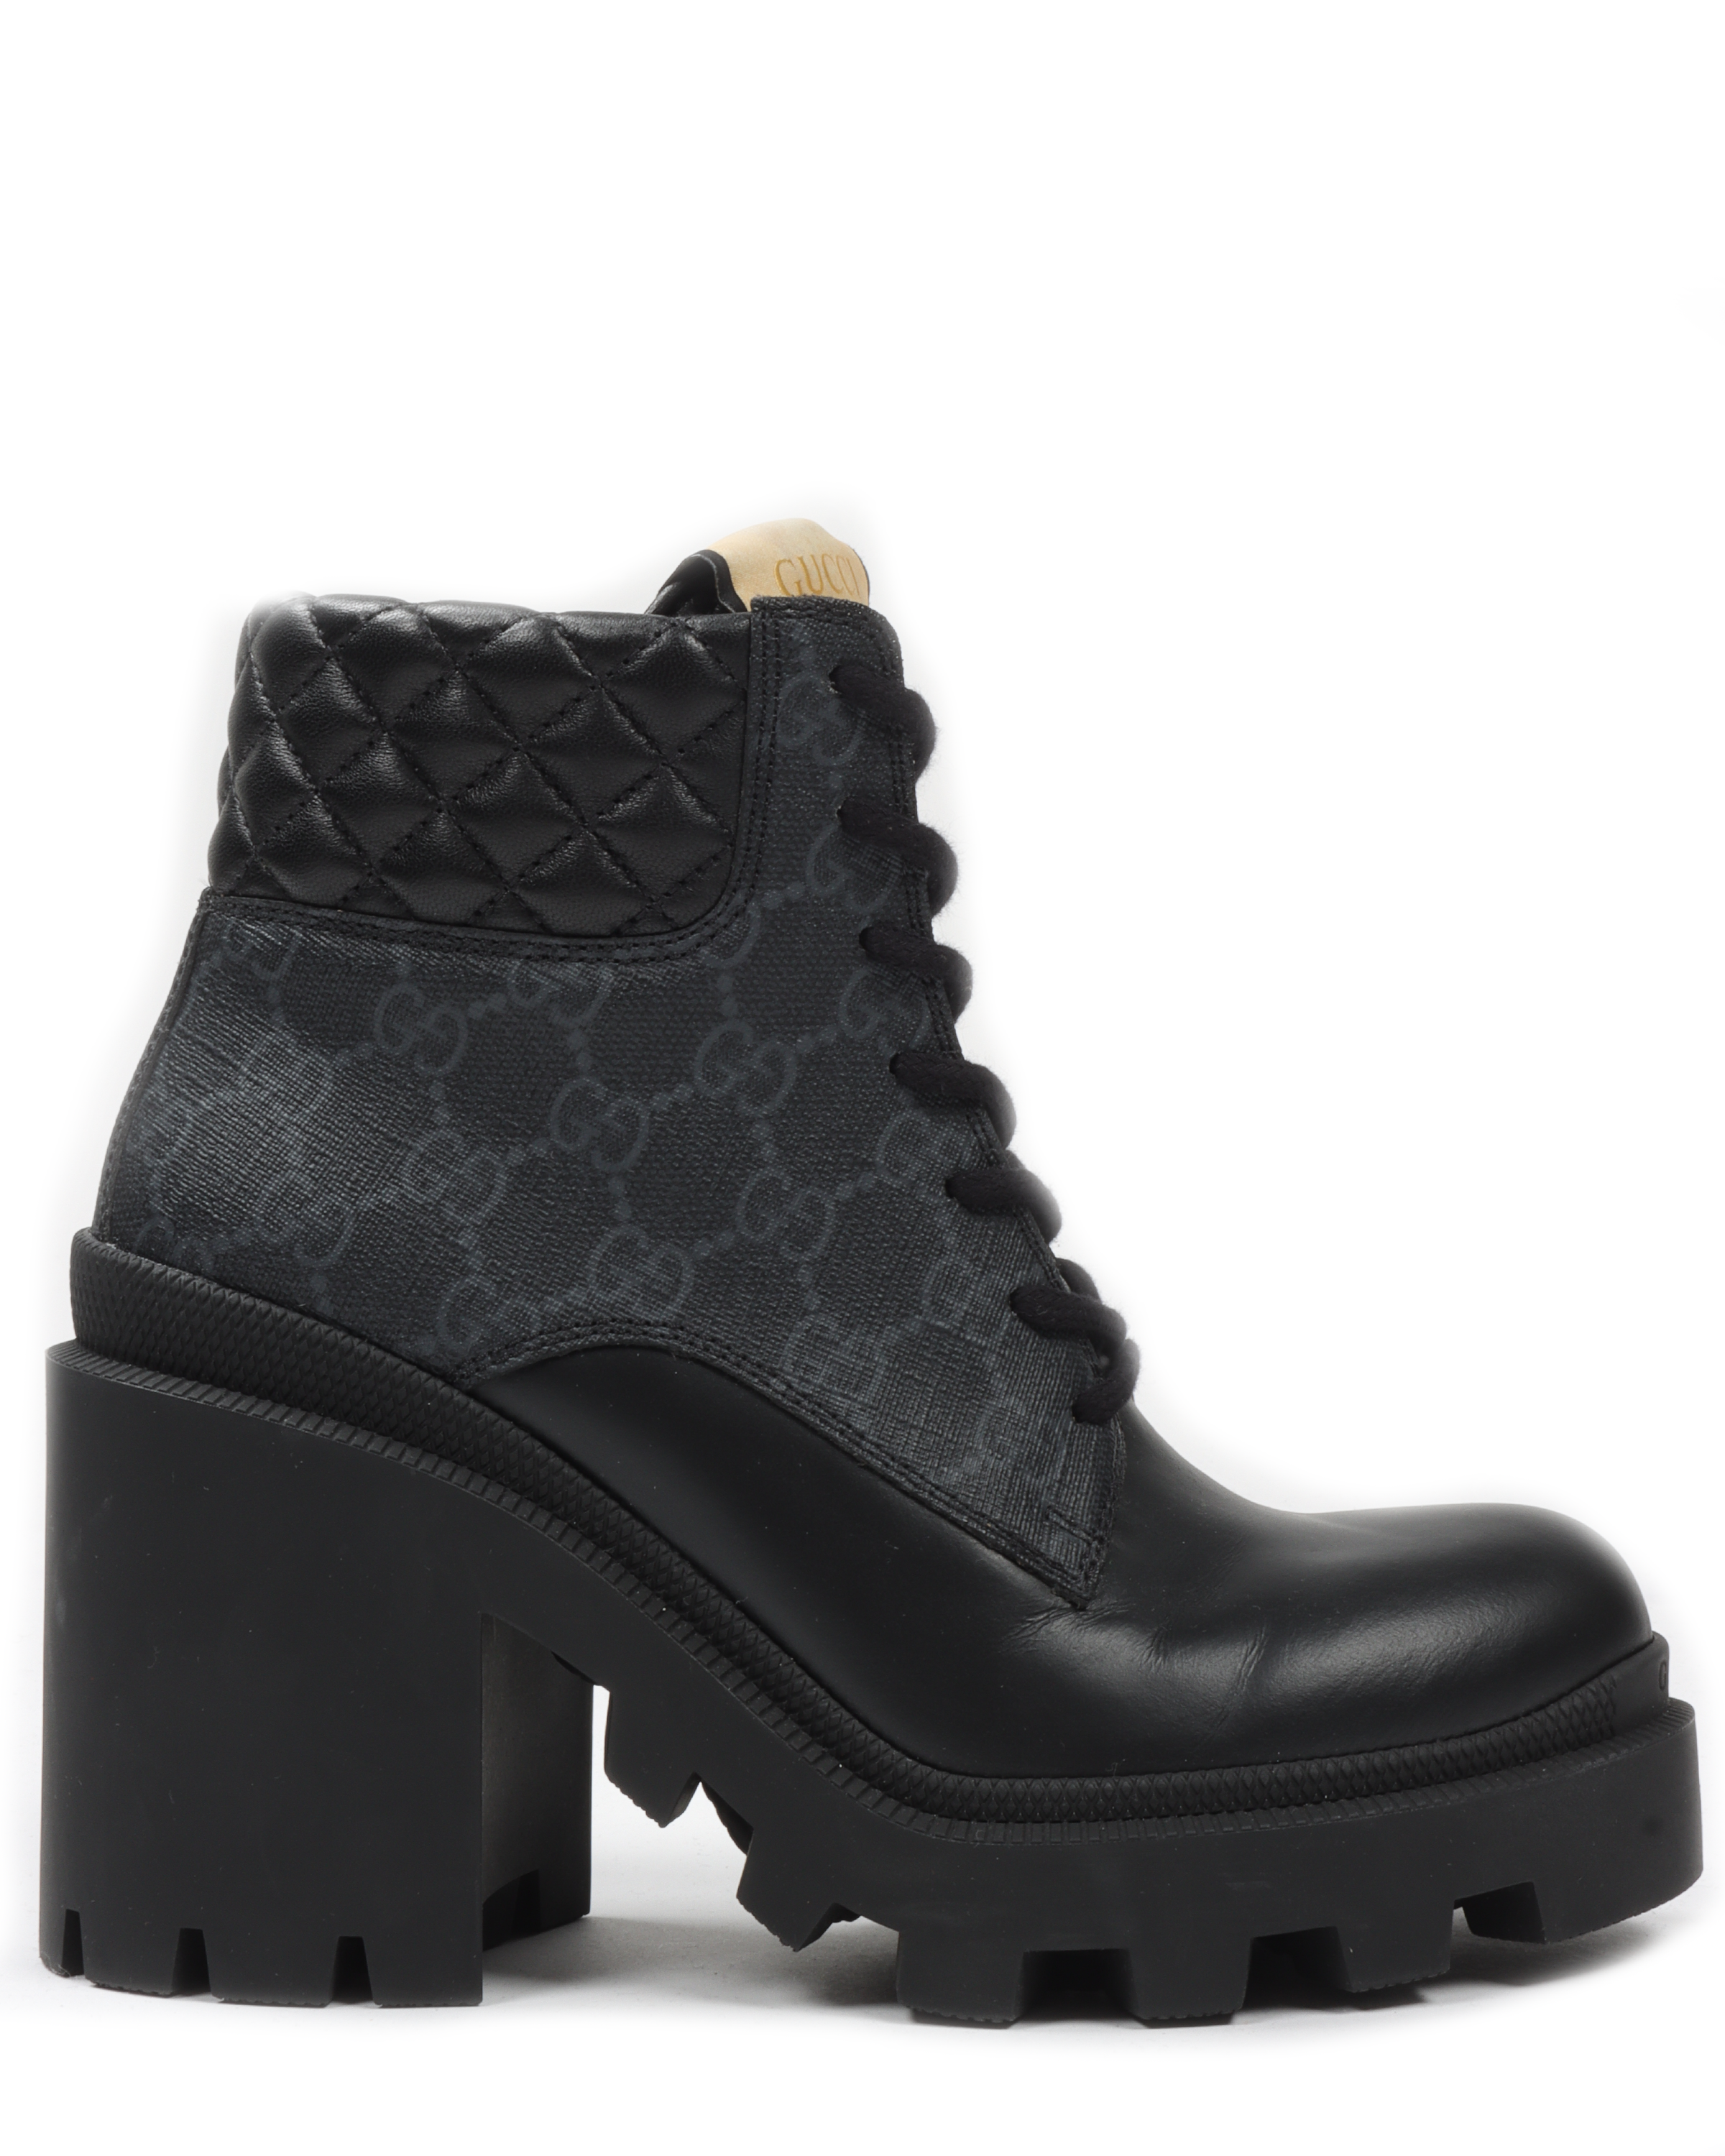 "GG" Ankle Boot